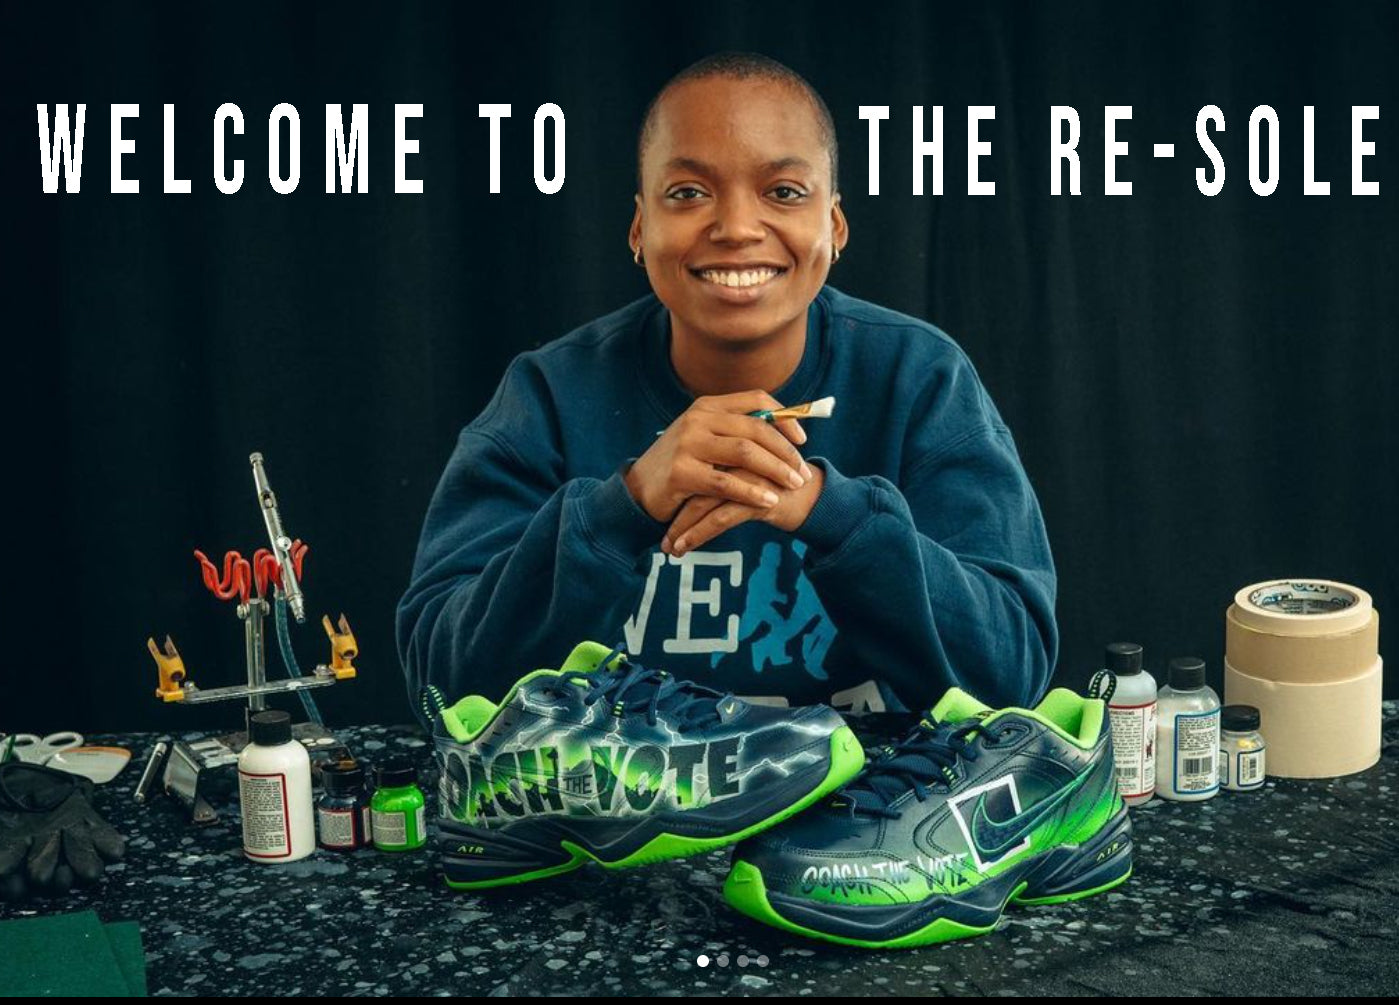 Load video: quick introduction to the world of The Re-Sole from its founder Takiyah TDUB Ward